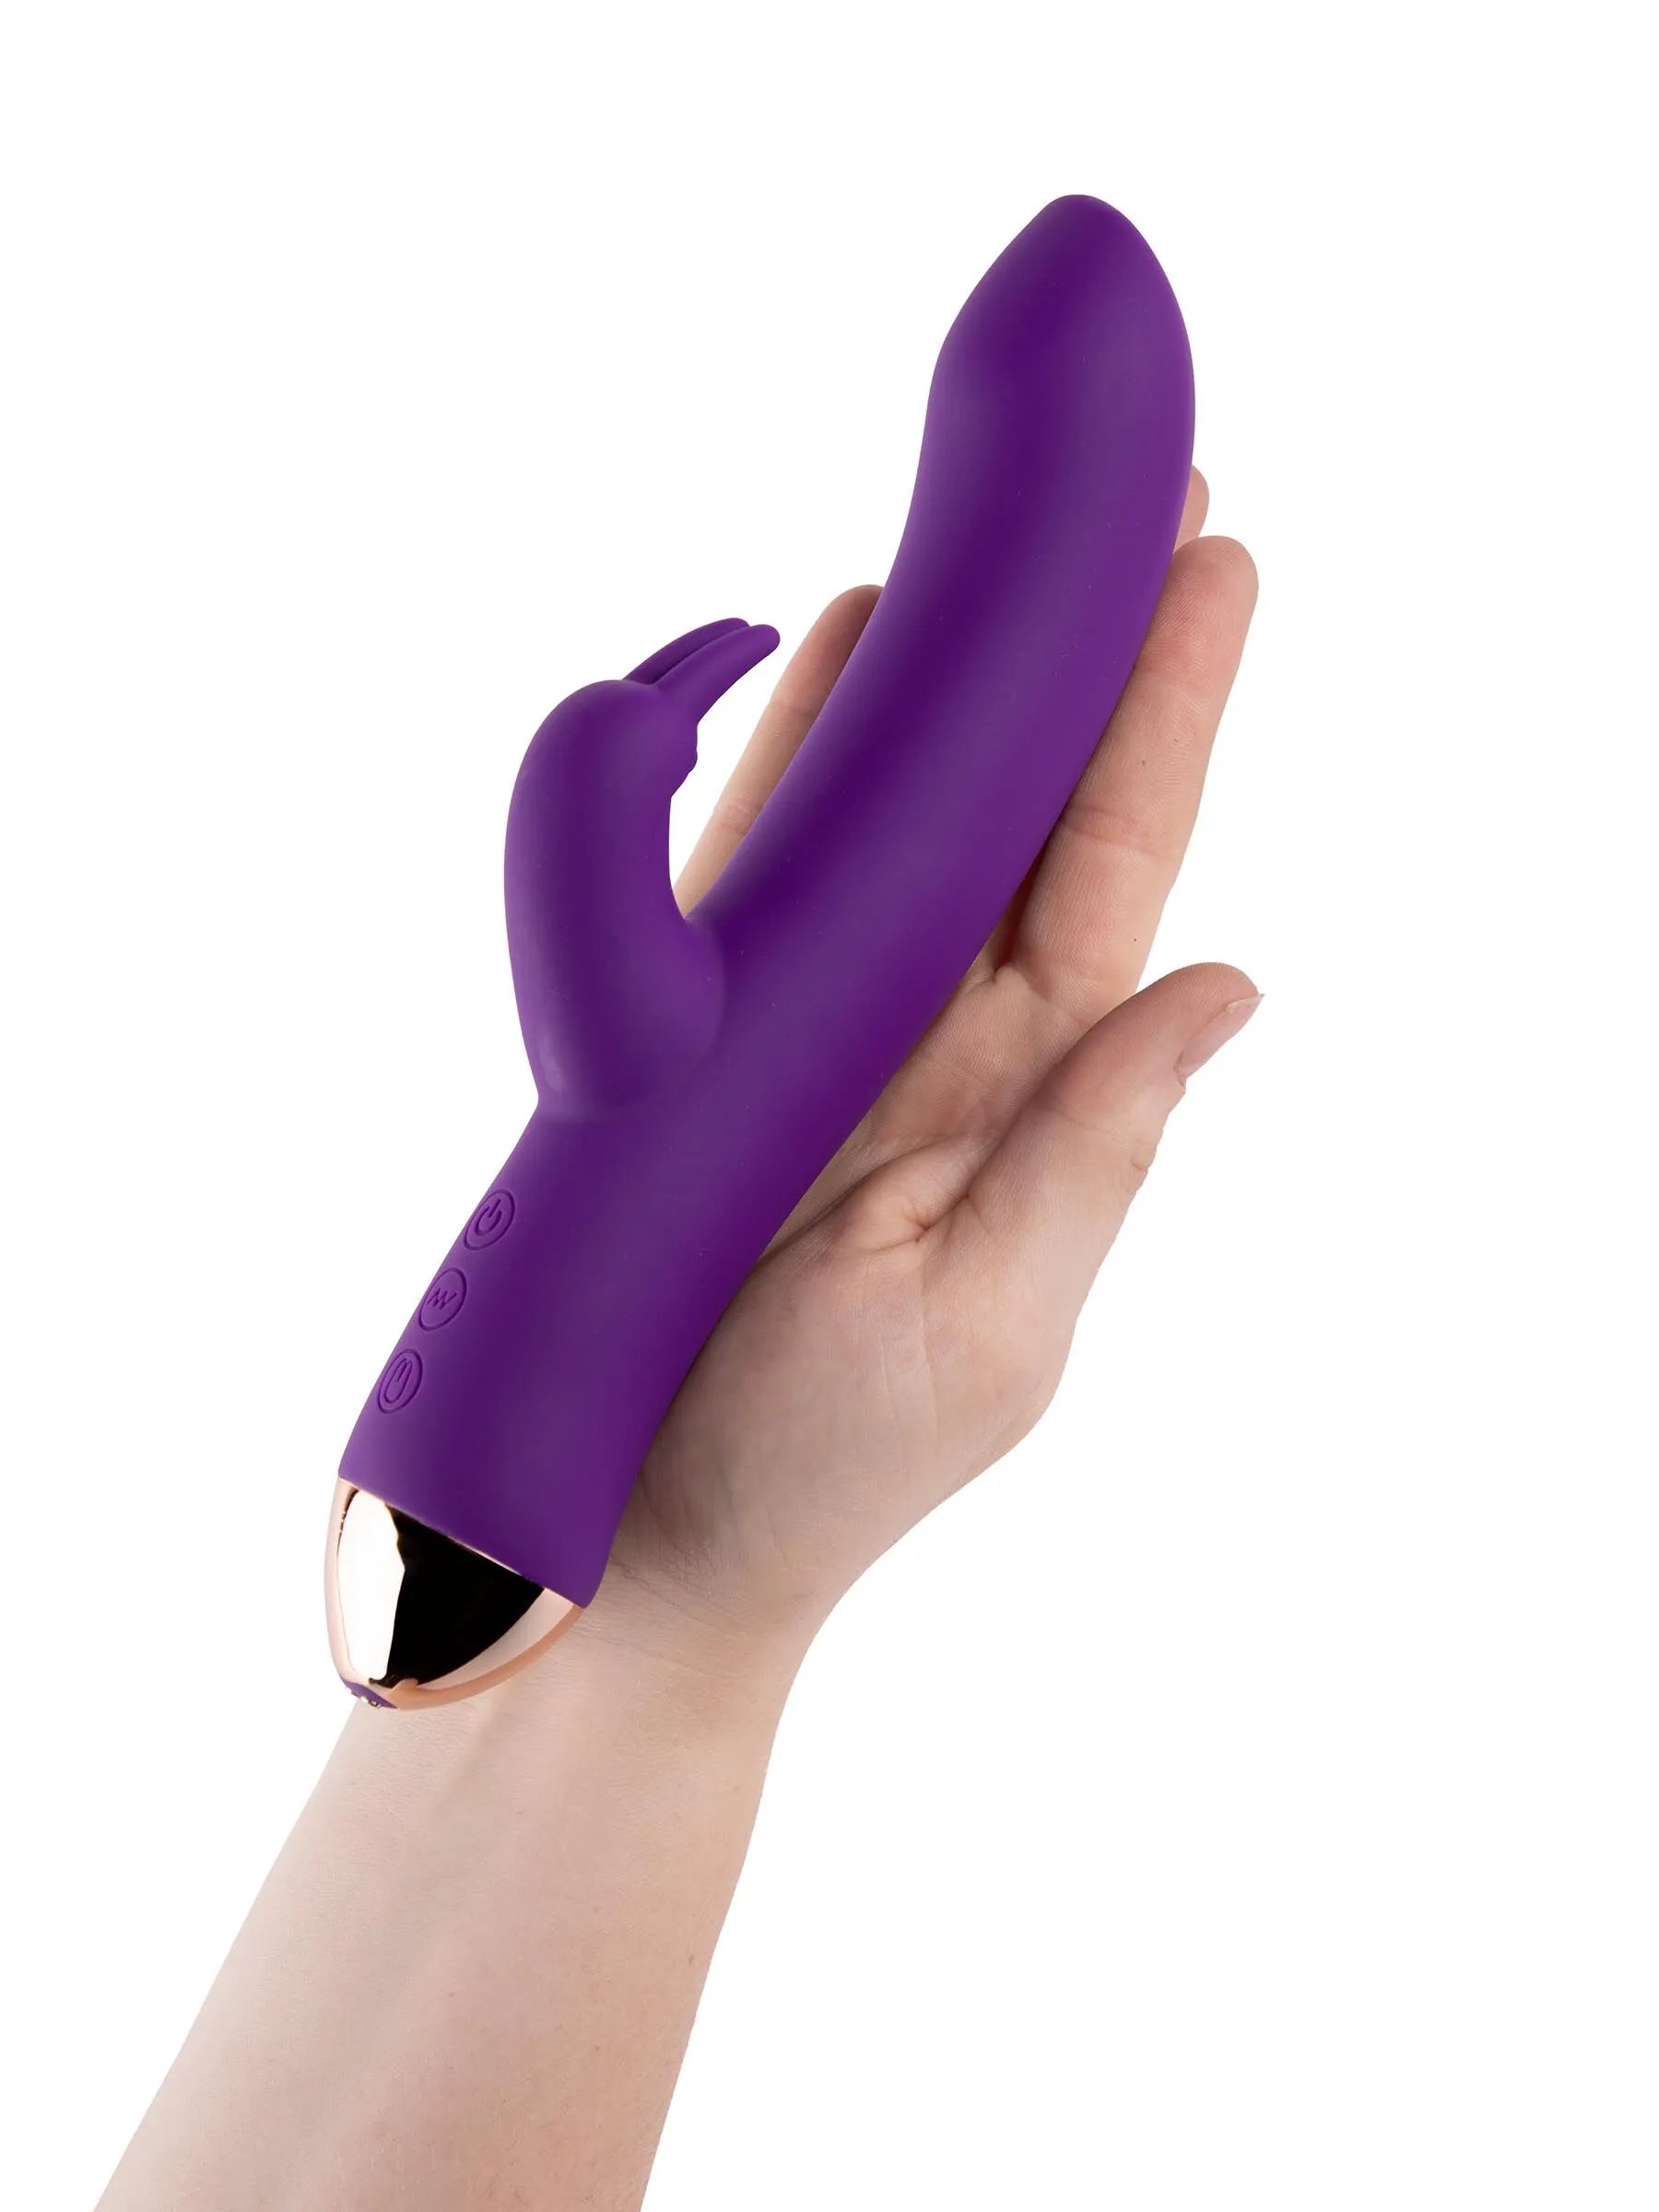 Moregasm Boost Rabbit From Ann Summers, Image 06